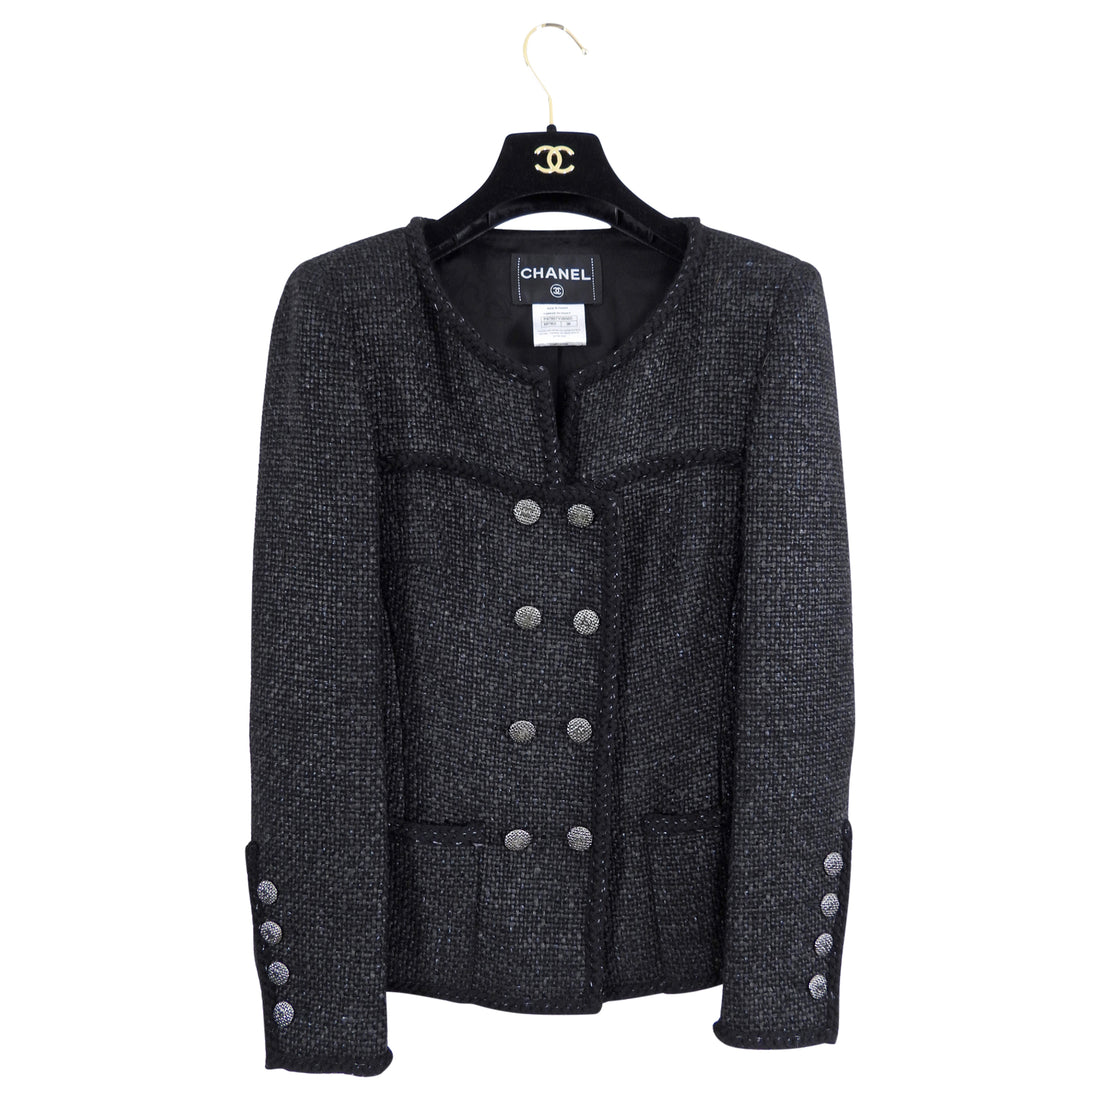 Chanel Classic Black Tweed Jacket with Ruthenium Buttons - FR38 (S